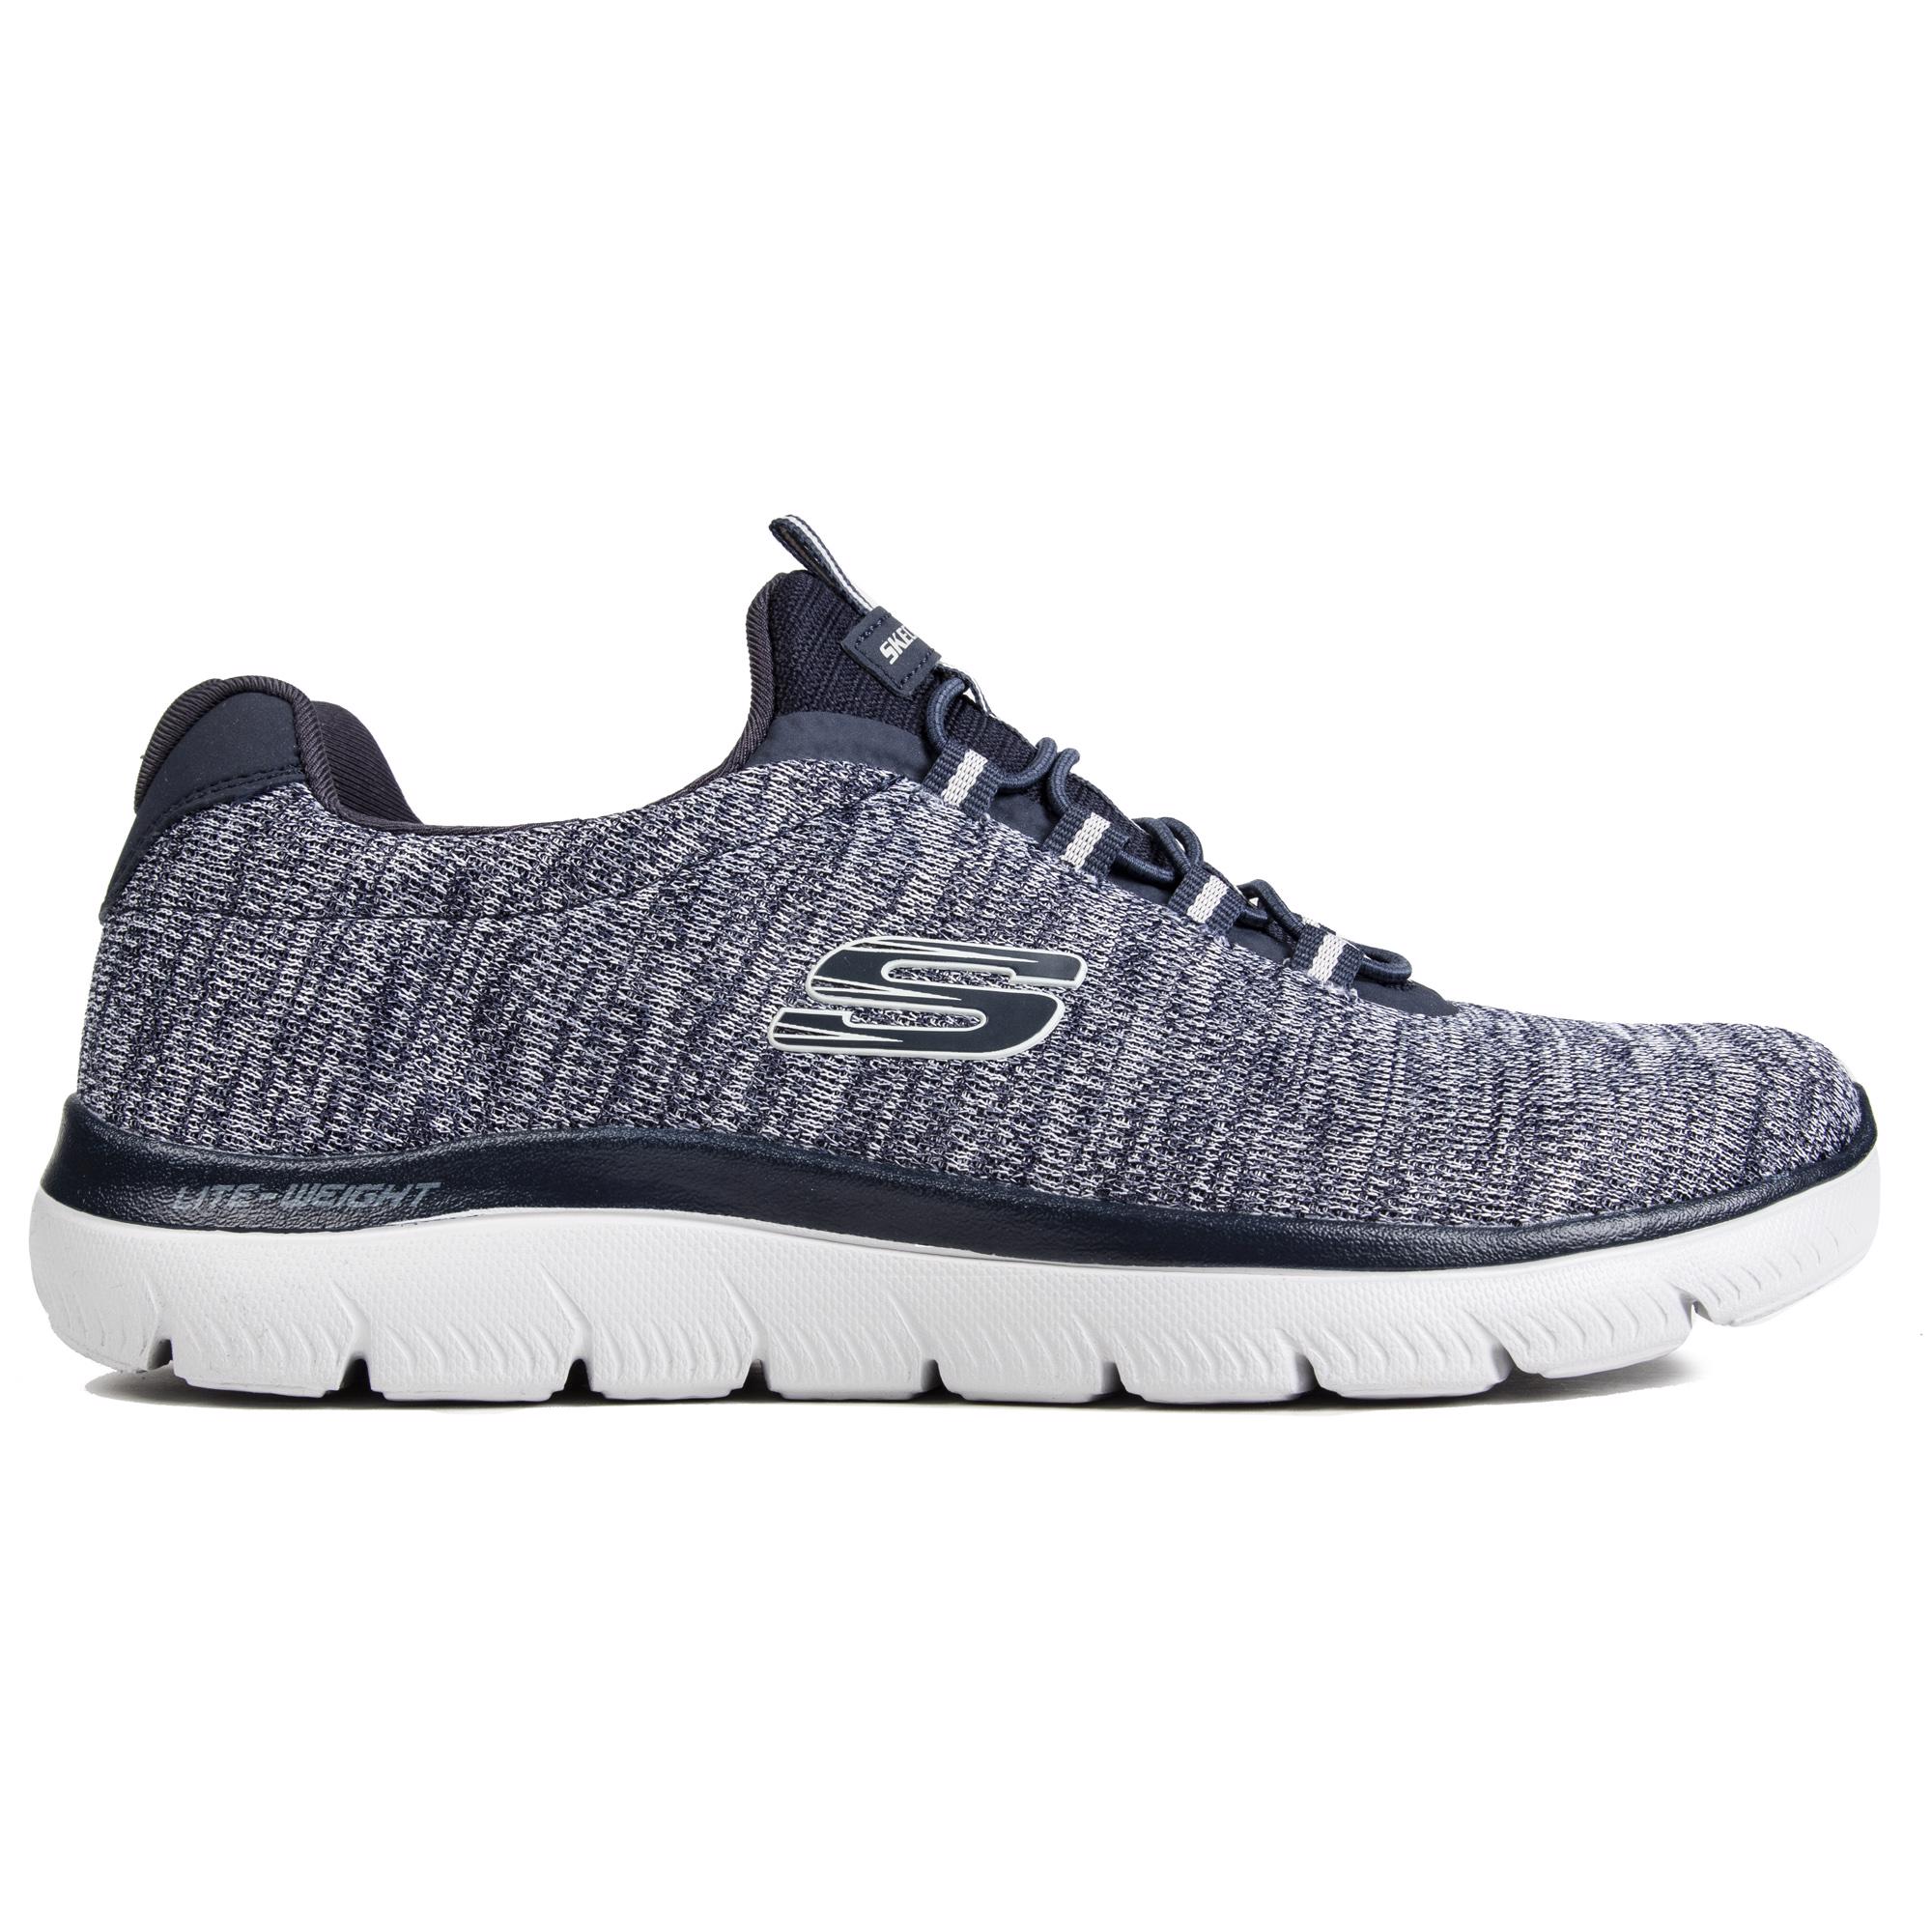 SKECHERS Mens Summits Running Style Trainers Blue